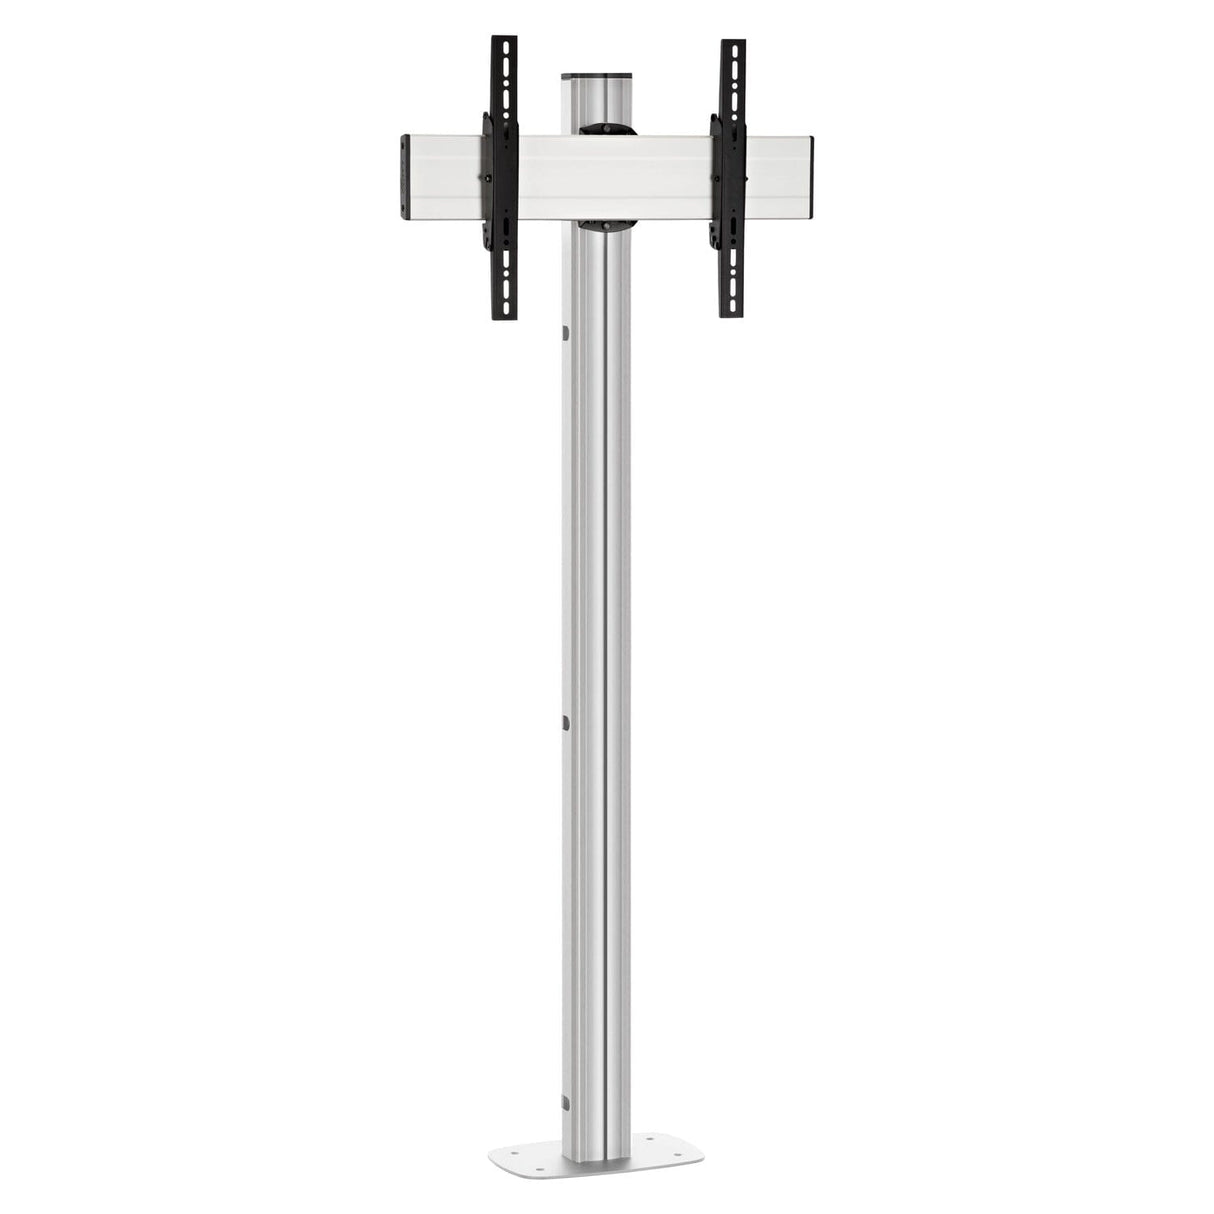 Vogels FM2044 Single Pole Fixed to Floor Stand For up to 65" TVs